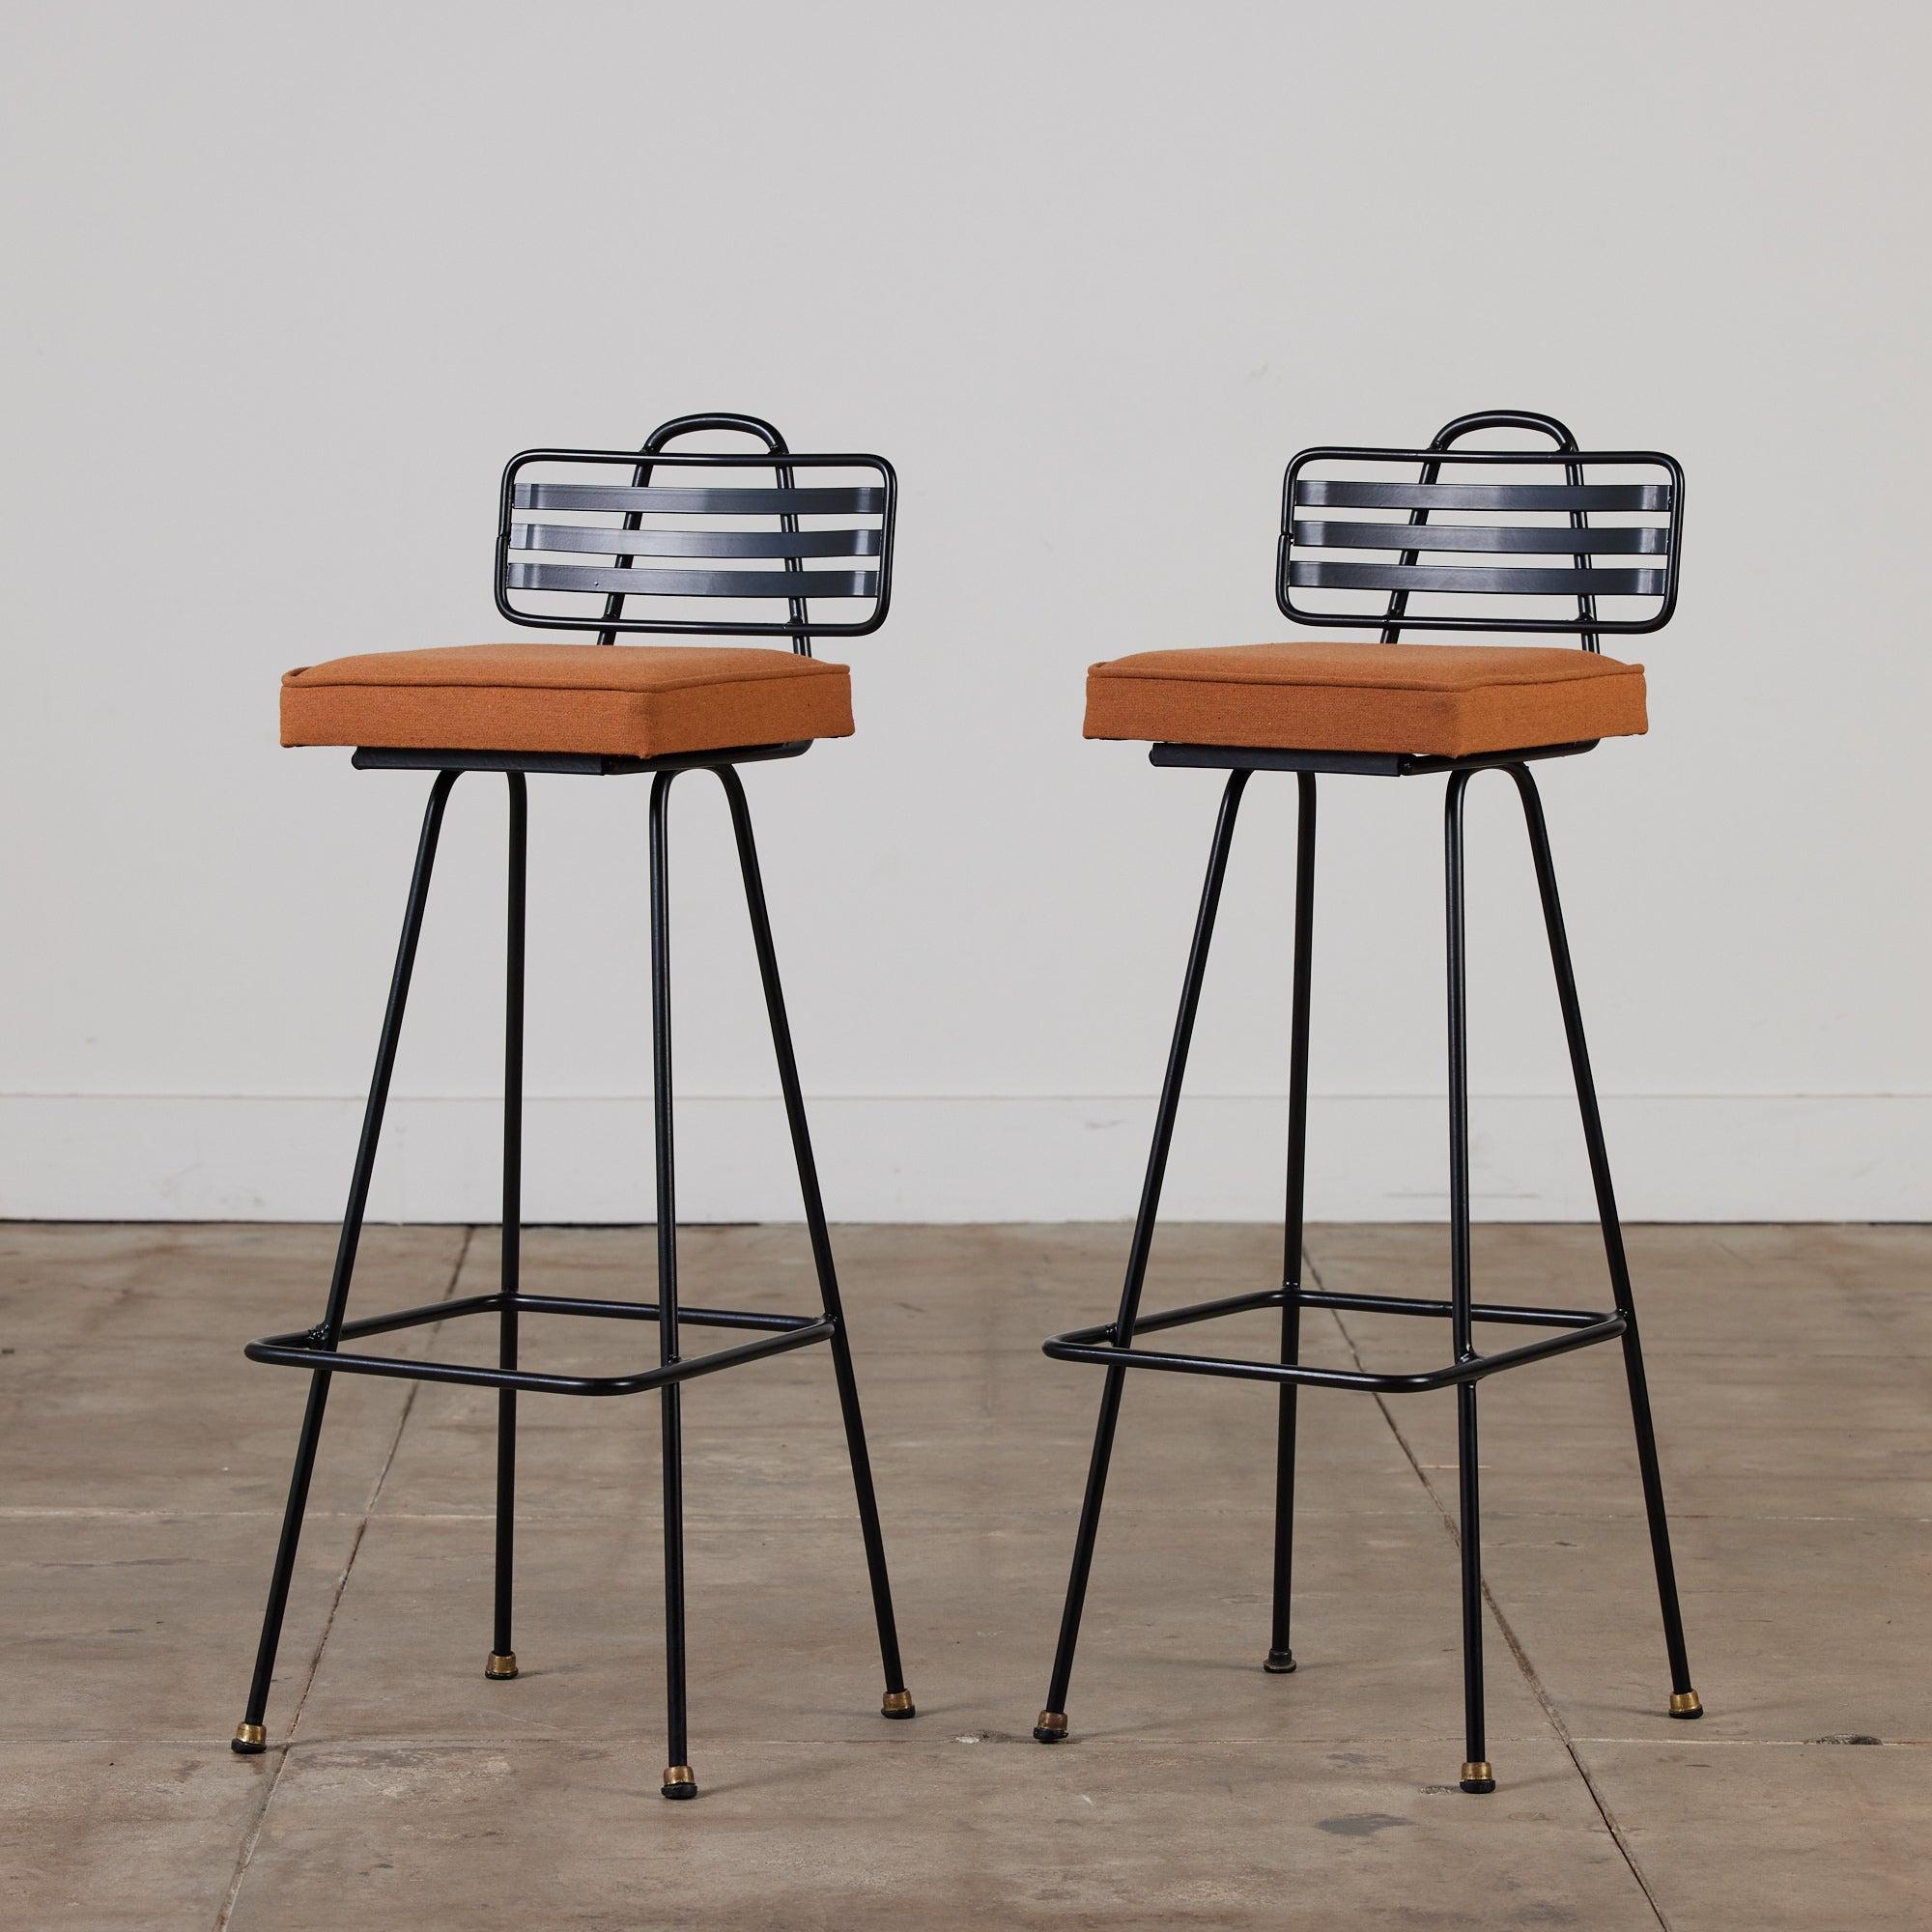 This bar height stool features a black powder coated tubular steel frame with a low slatted seat back and foot rest. The square seat cushions are upholstered in a burnt orange fabric. This would be great indoor or outdoor stool.

There are two